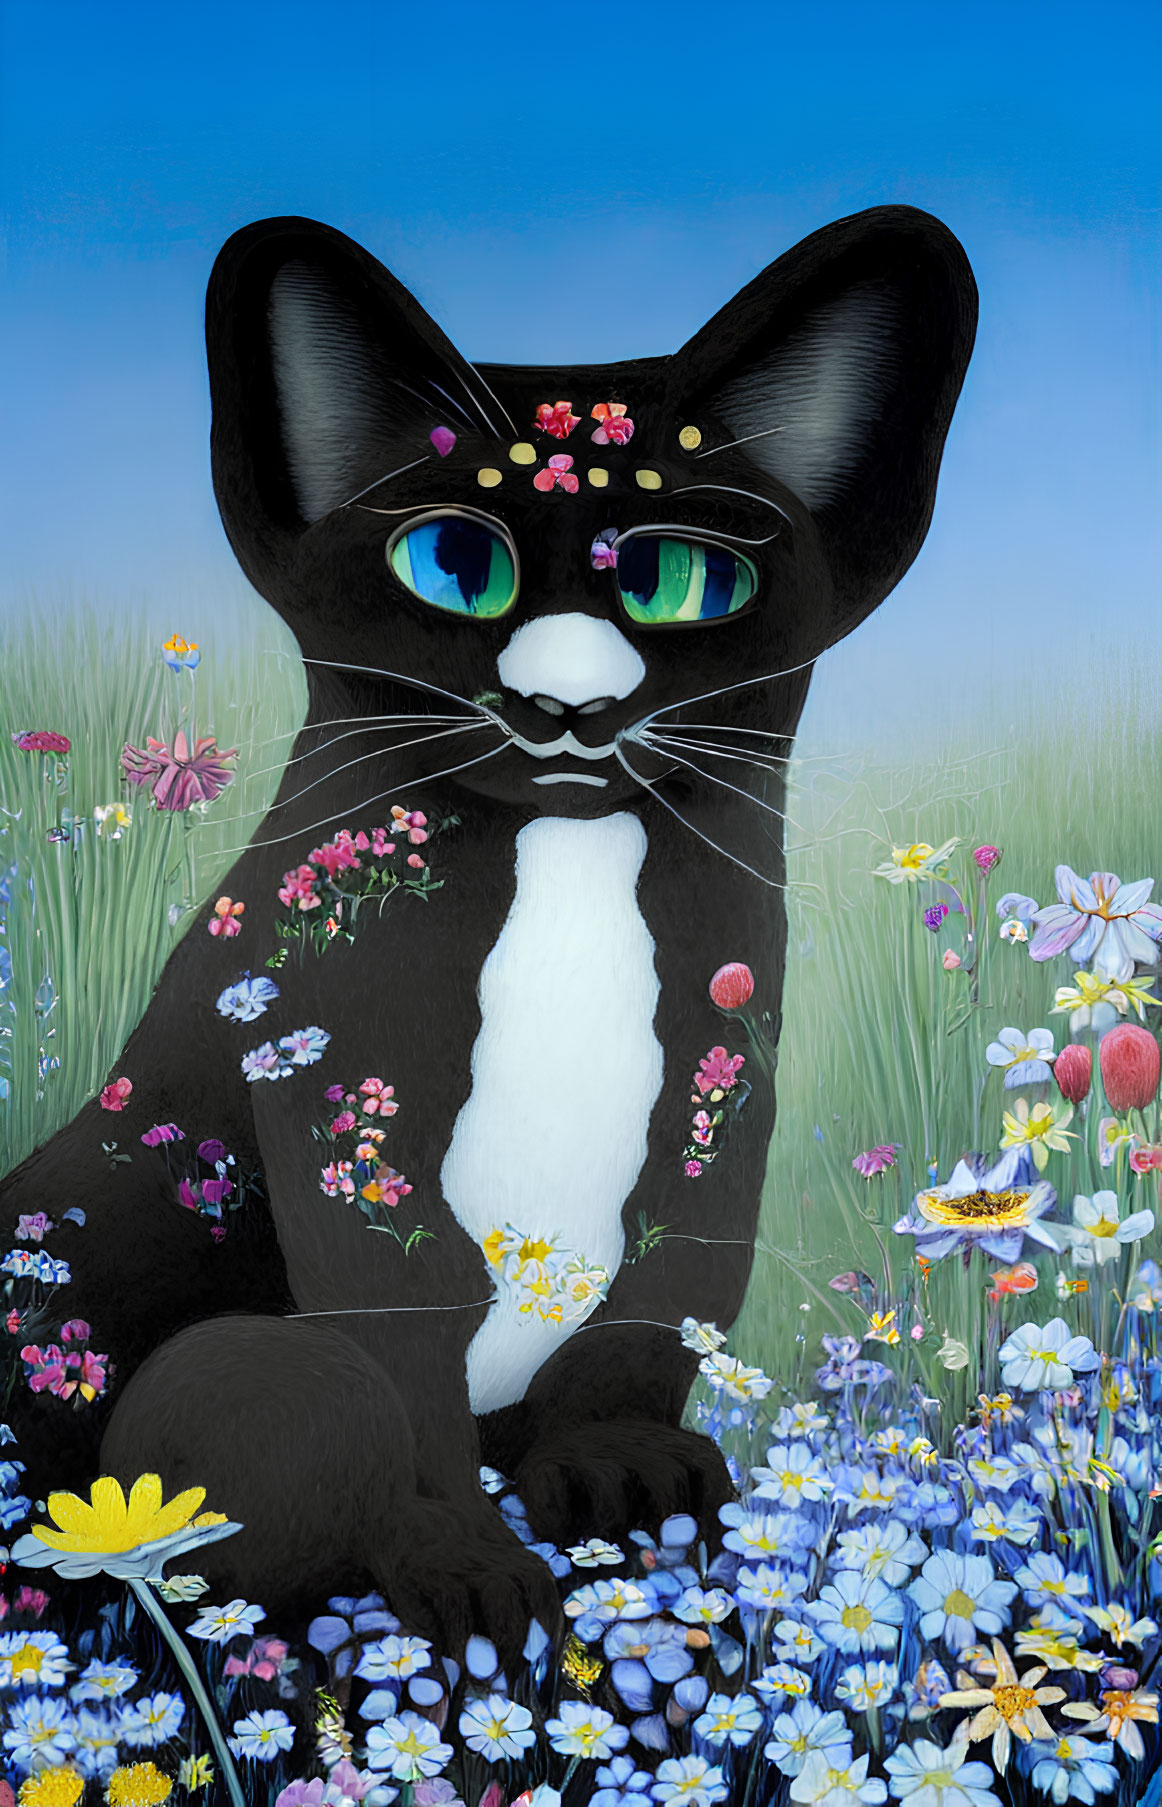 Colorful Painting of Black Cat Among Vibrant Flowers